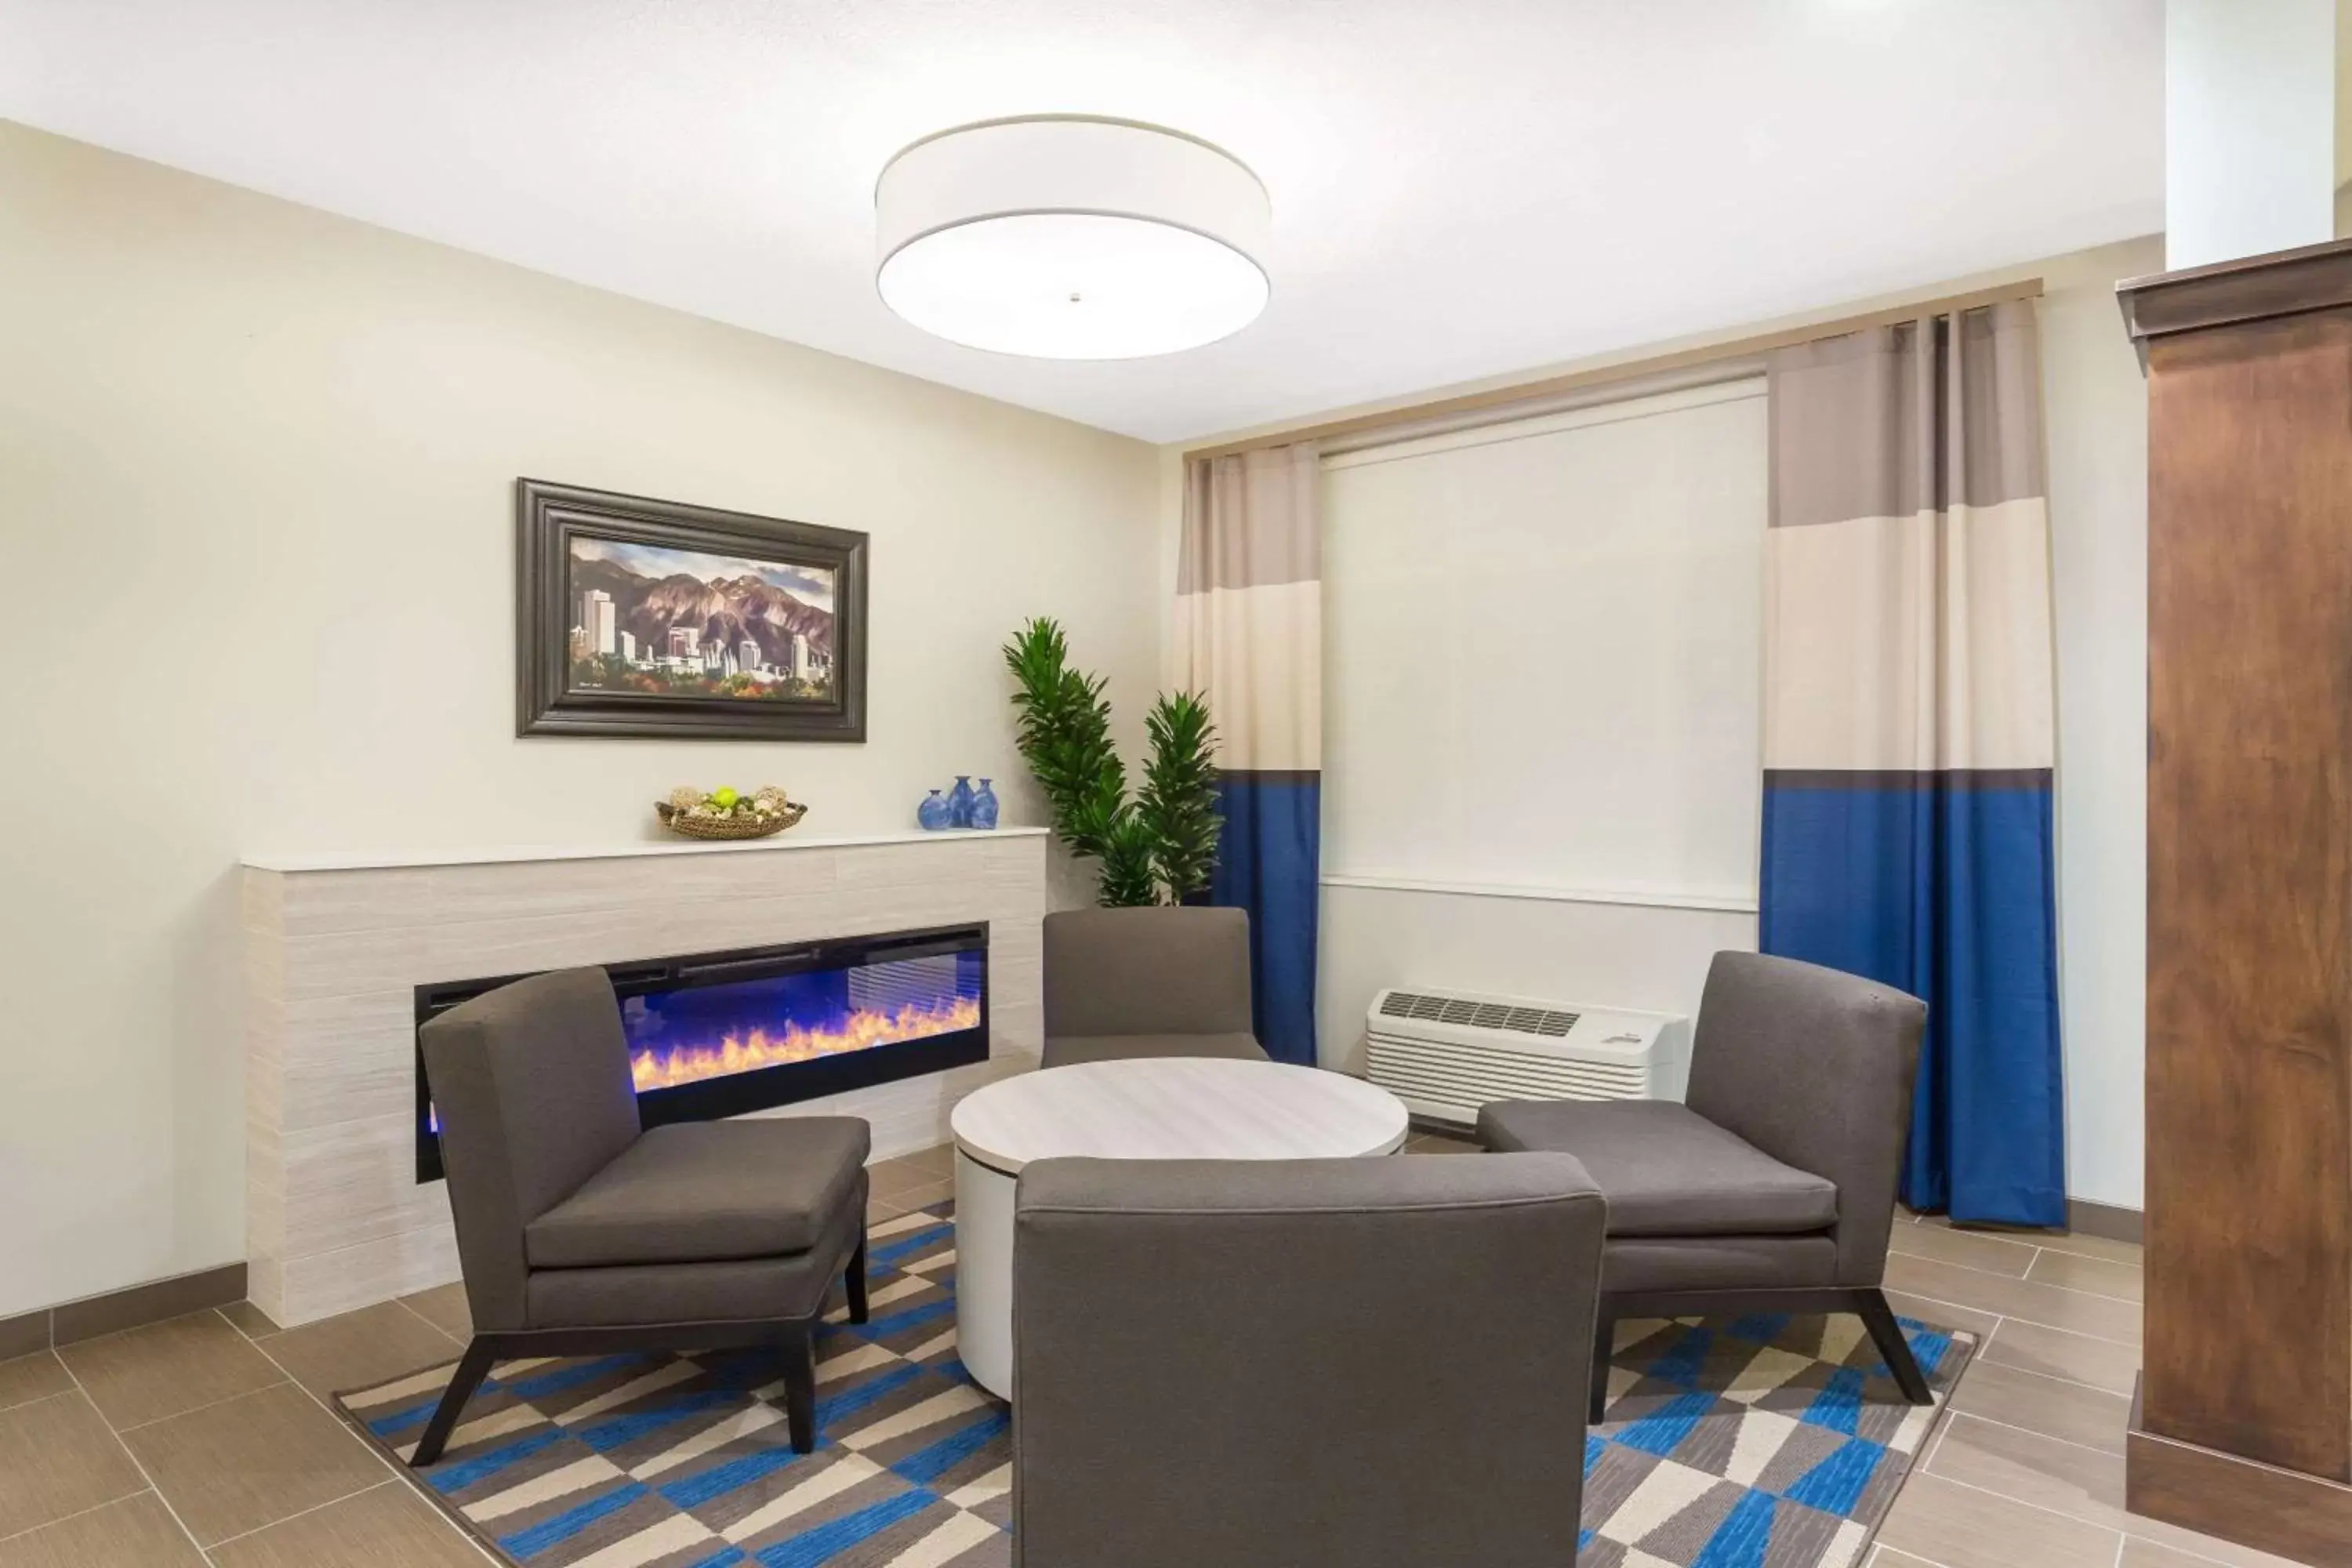 Lobby or reception in Microtel Inn & Suites by Wyndham Springville